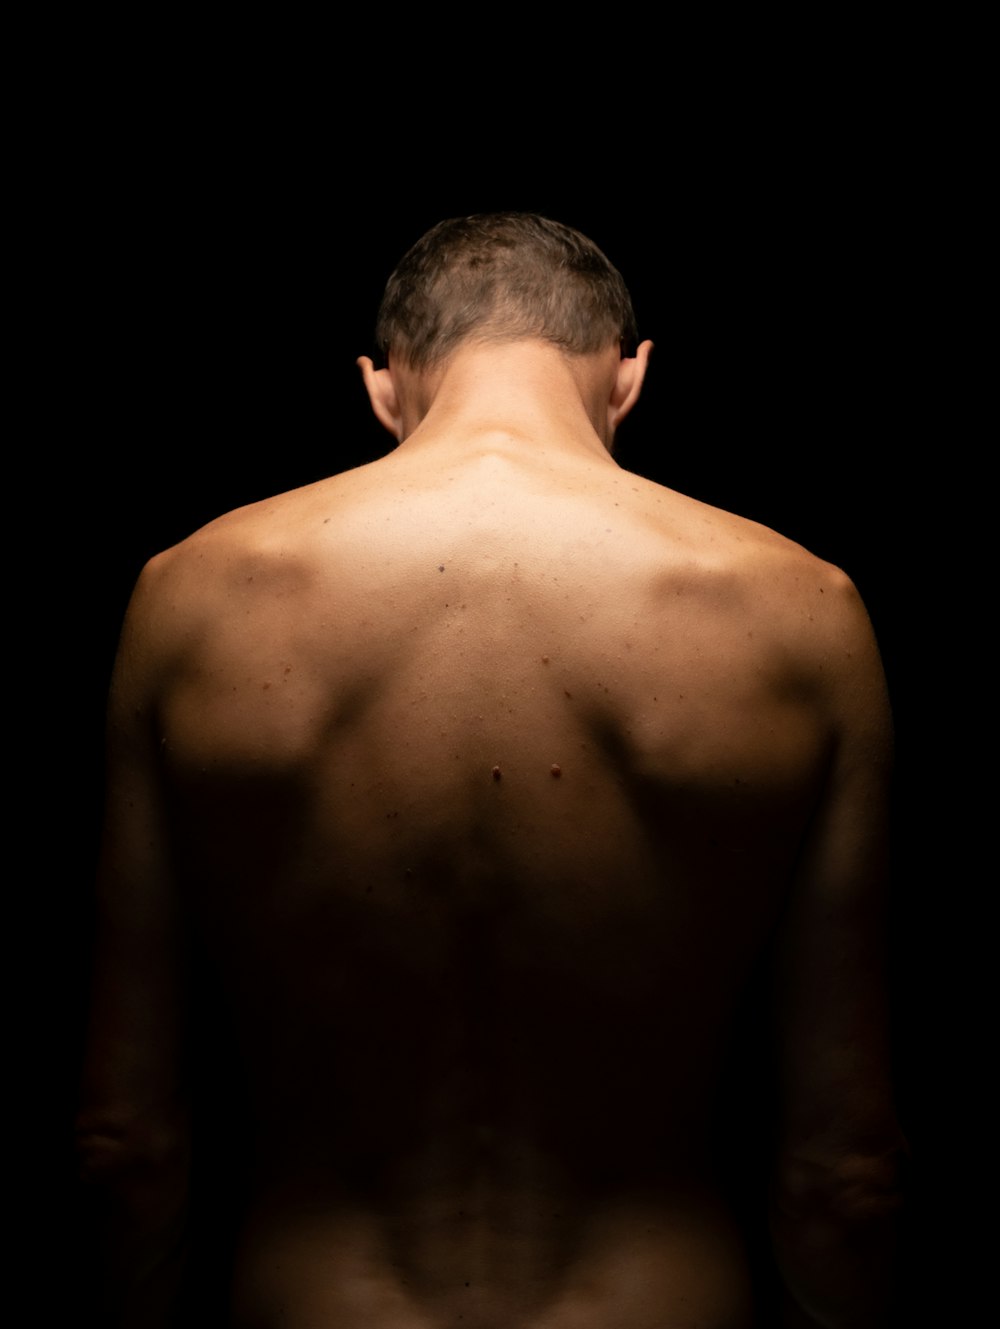 back of a person